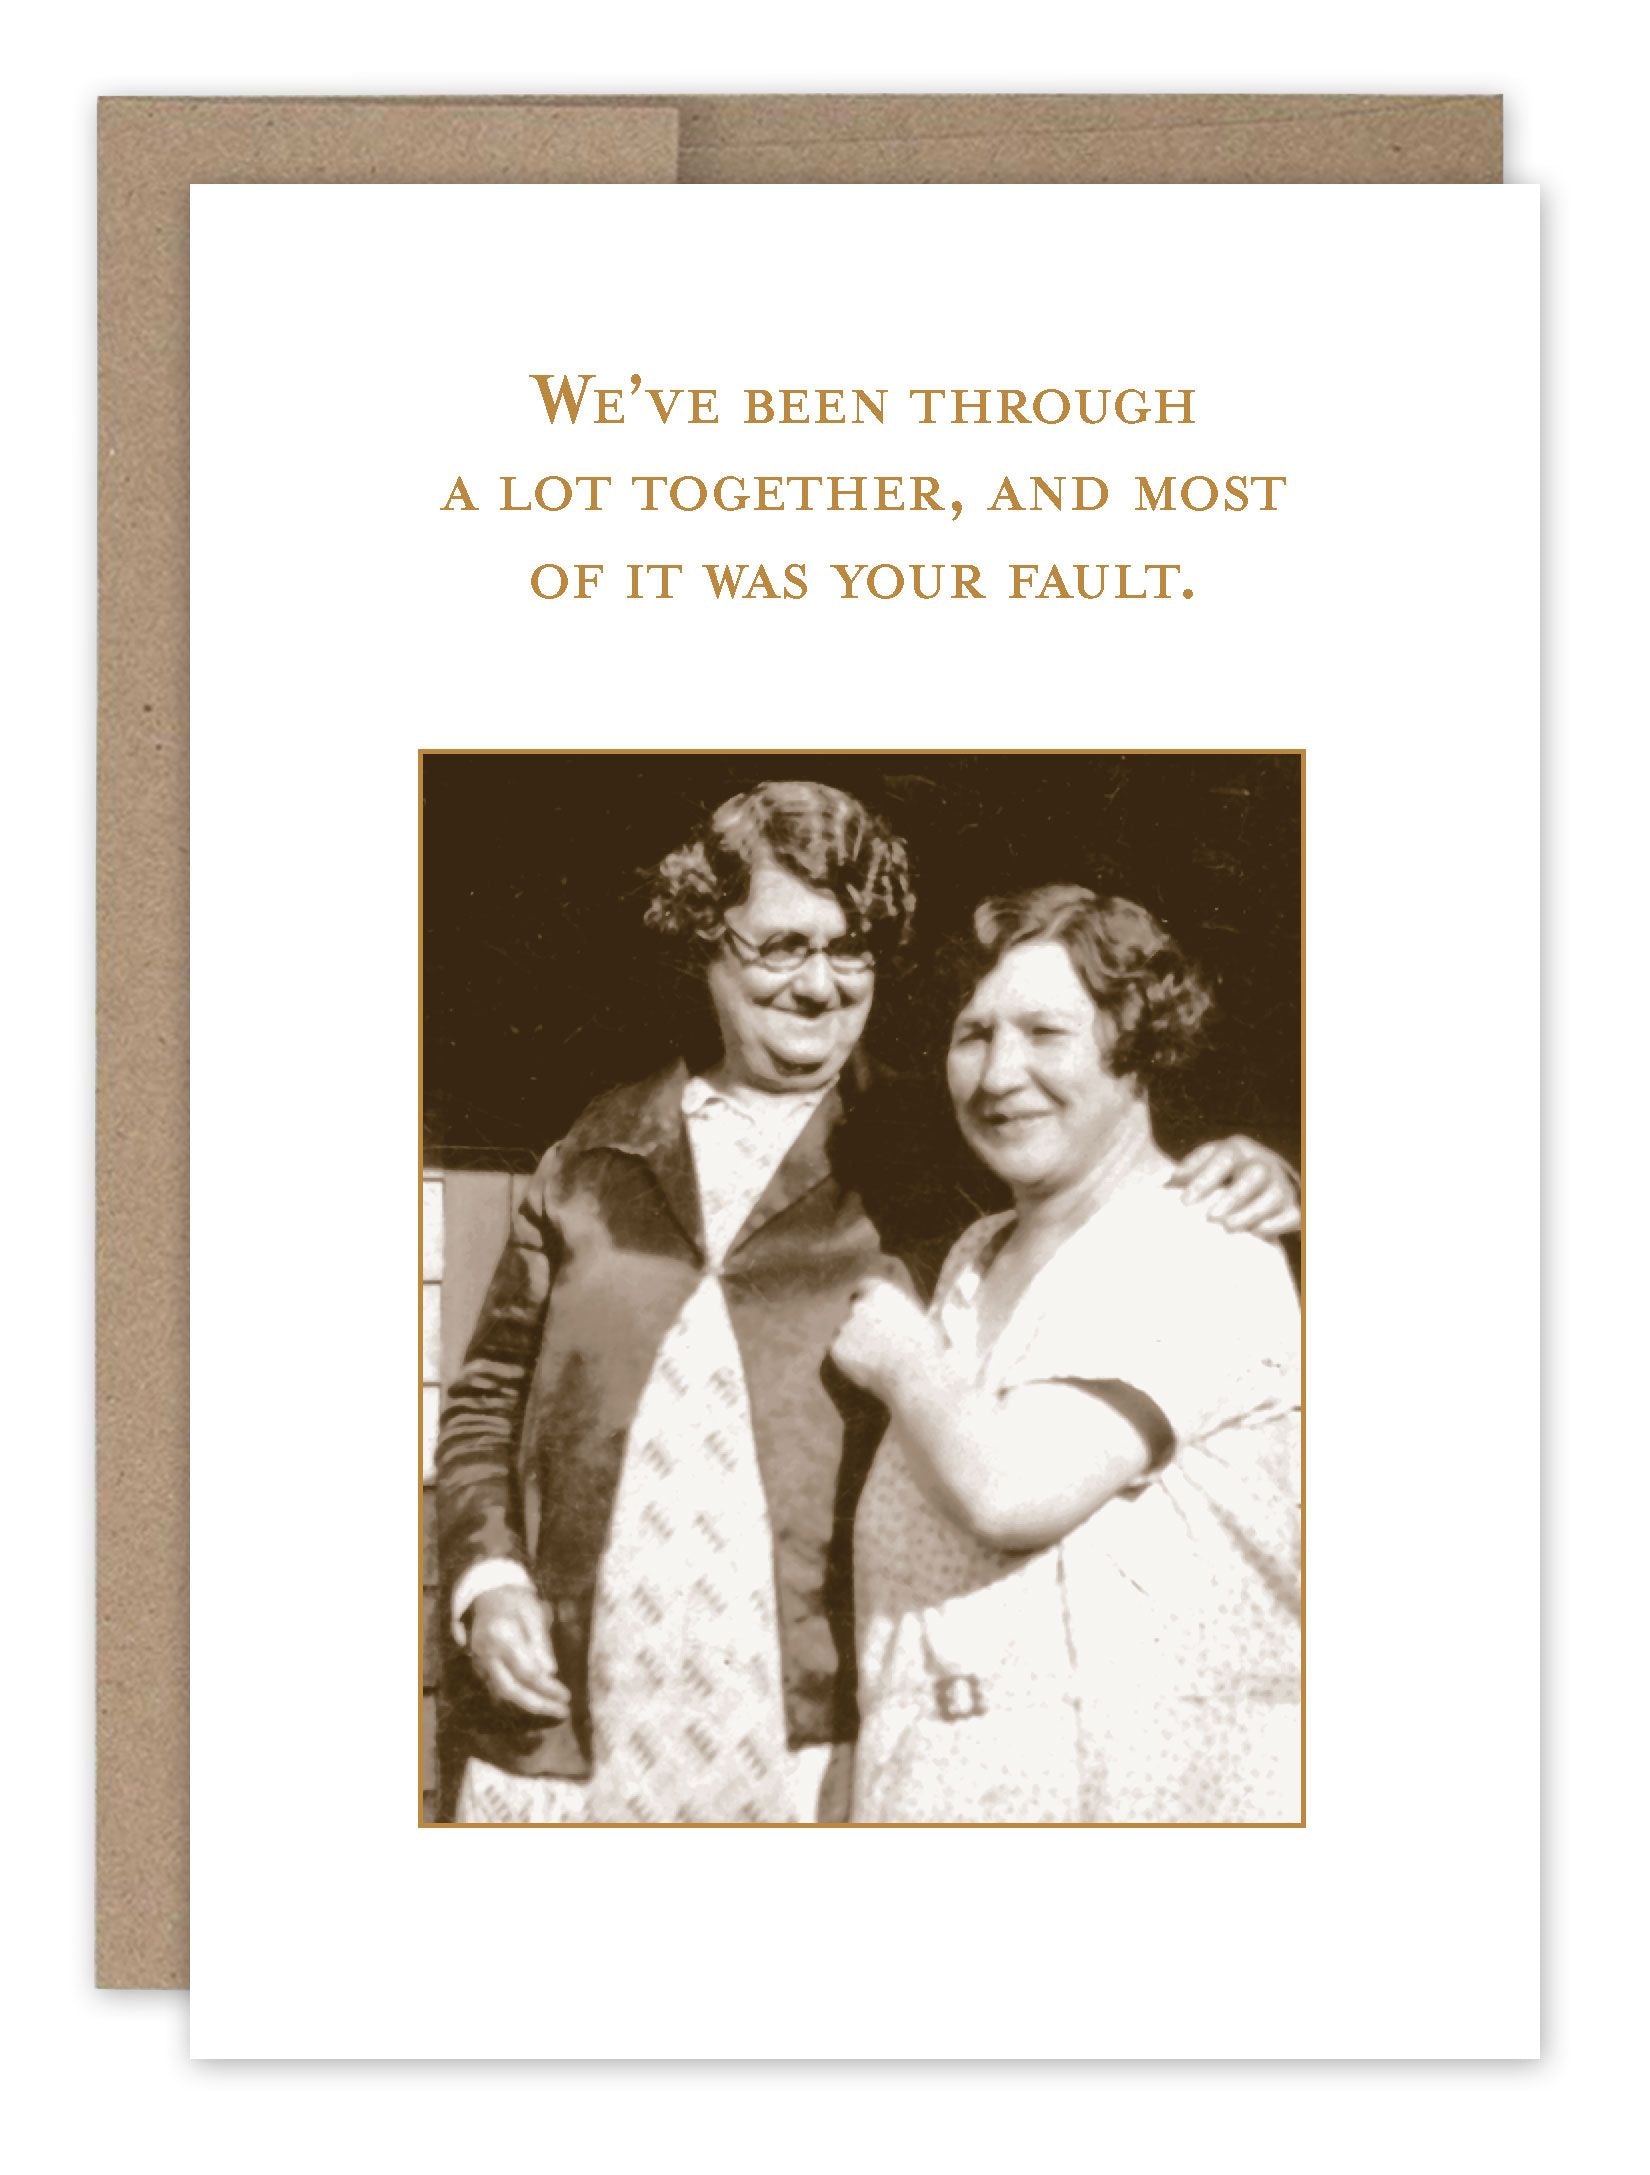 Shannon Martin Friendship Card – Your Fault